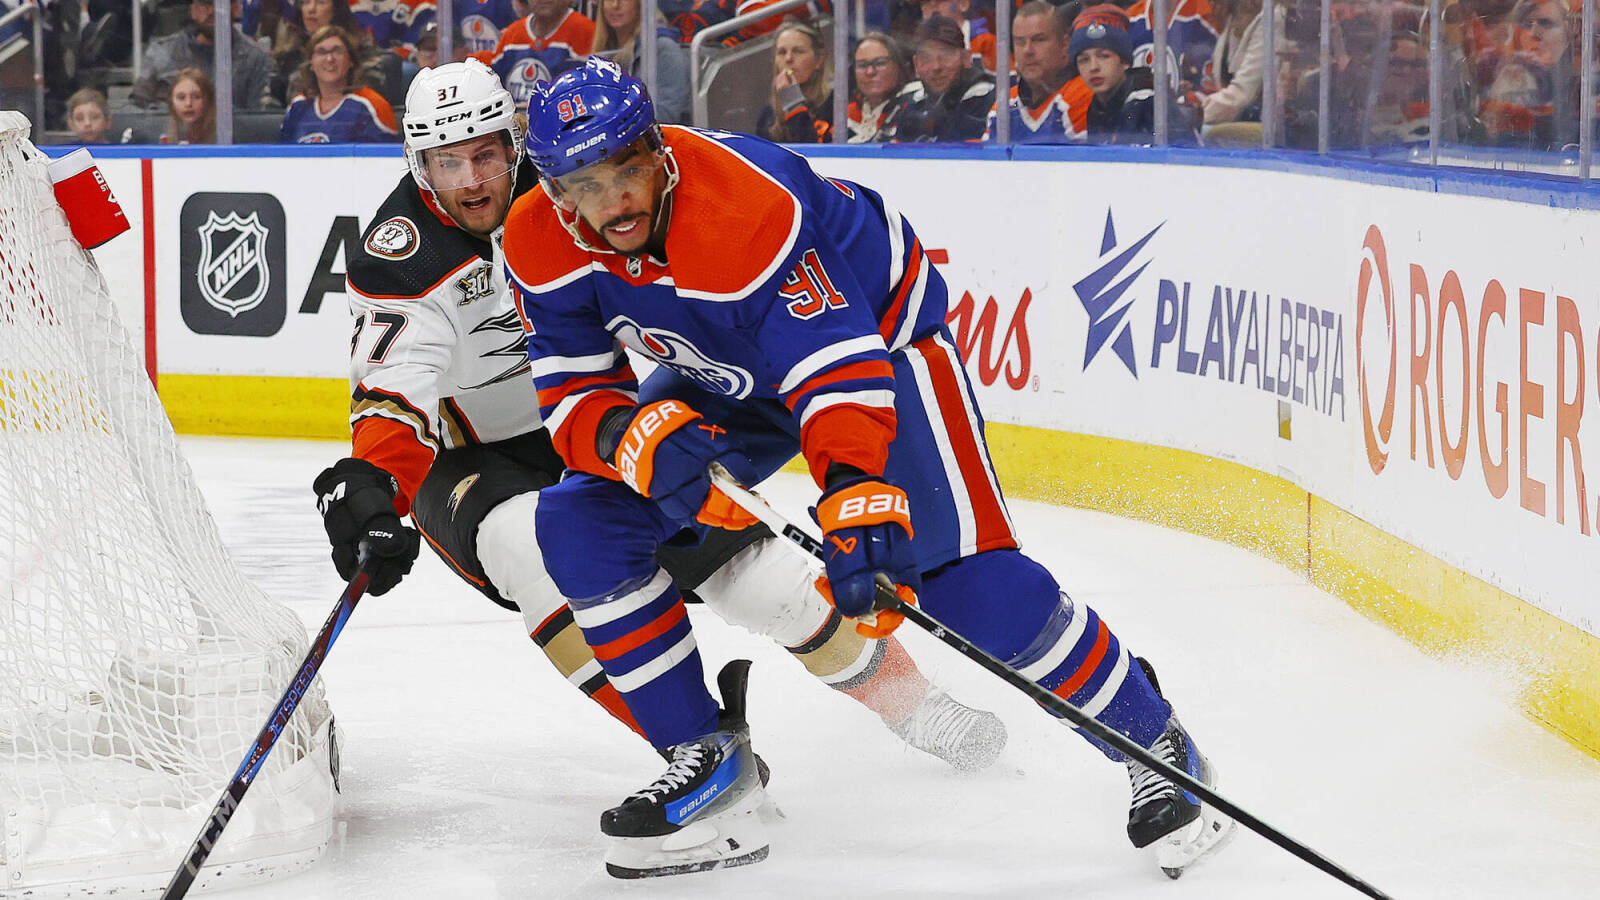 Oilers Make Interesting Lineup Choices For Game 1 vs. Kings